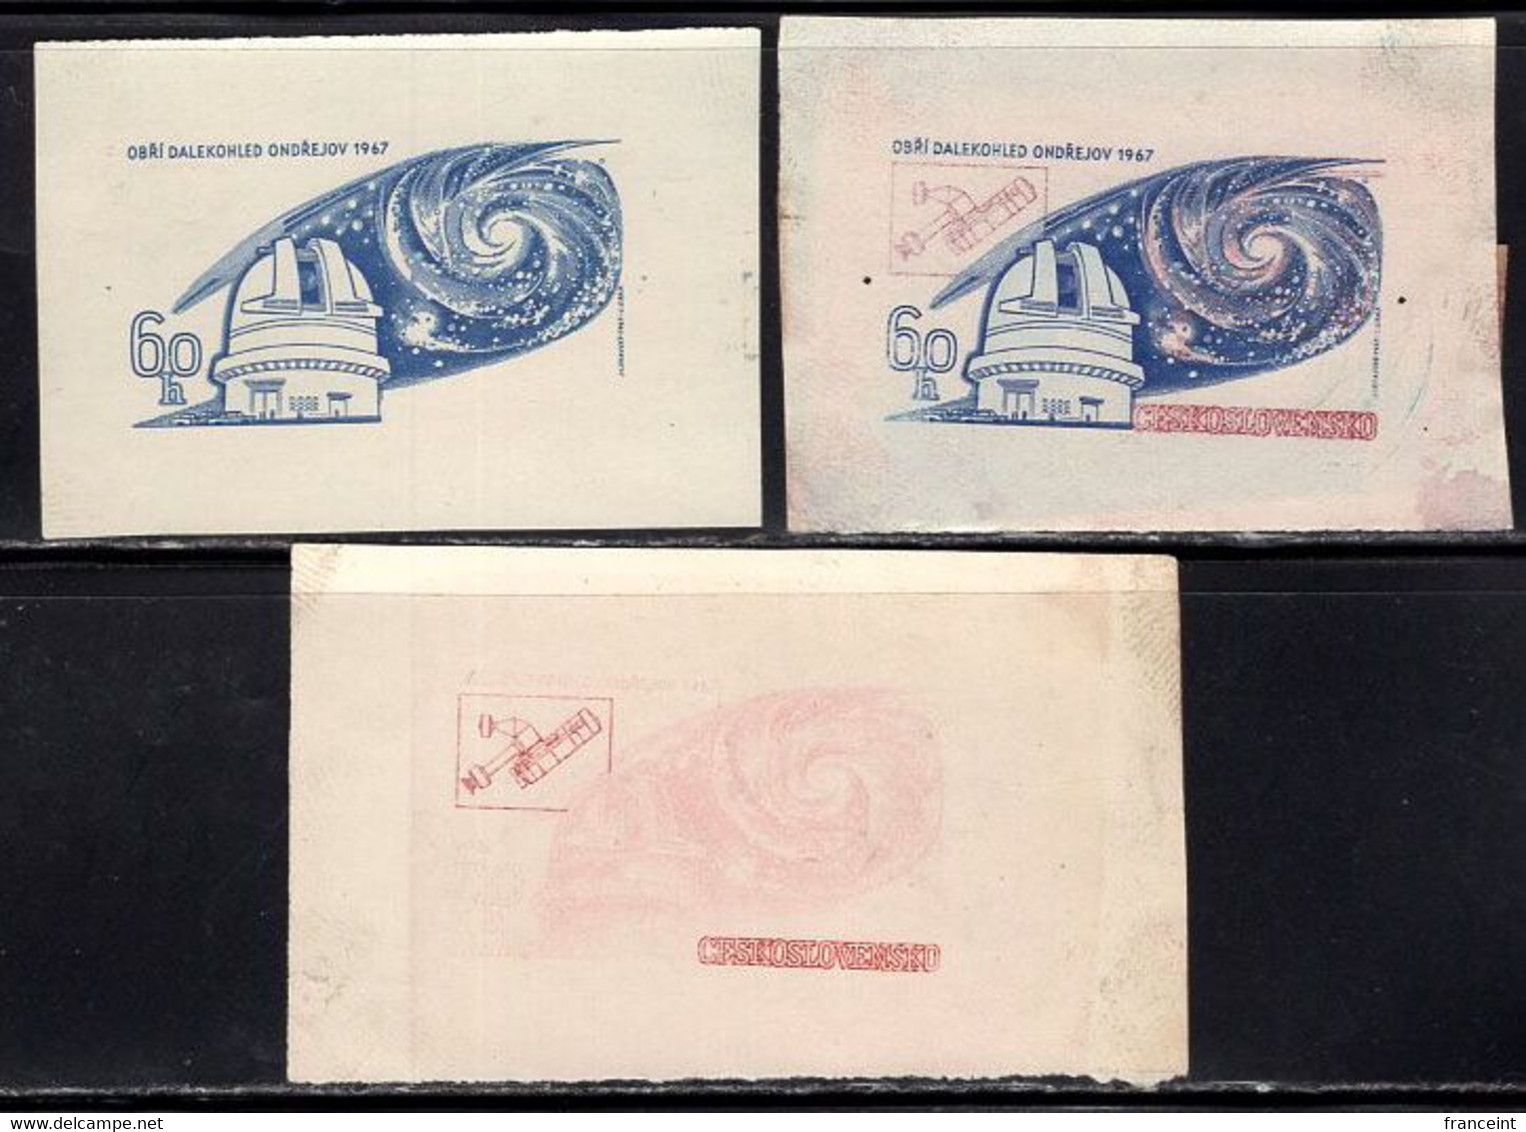 CZECHOSLOVAKIA (1967) Ondrejov Observatory. Galaxy. Series Of 3 Die Proofs Showing Various Stages. Scott No 1489. - Prove E Ristampe